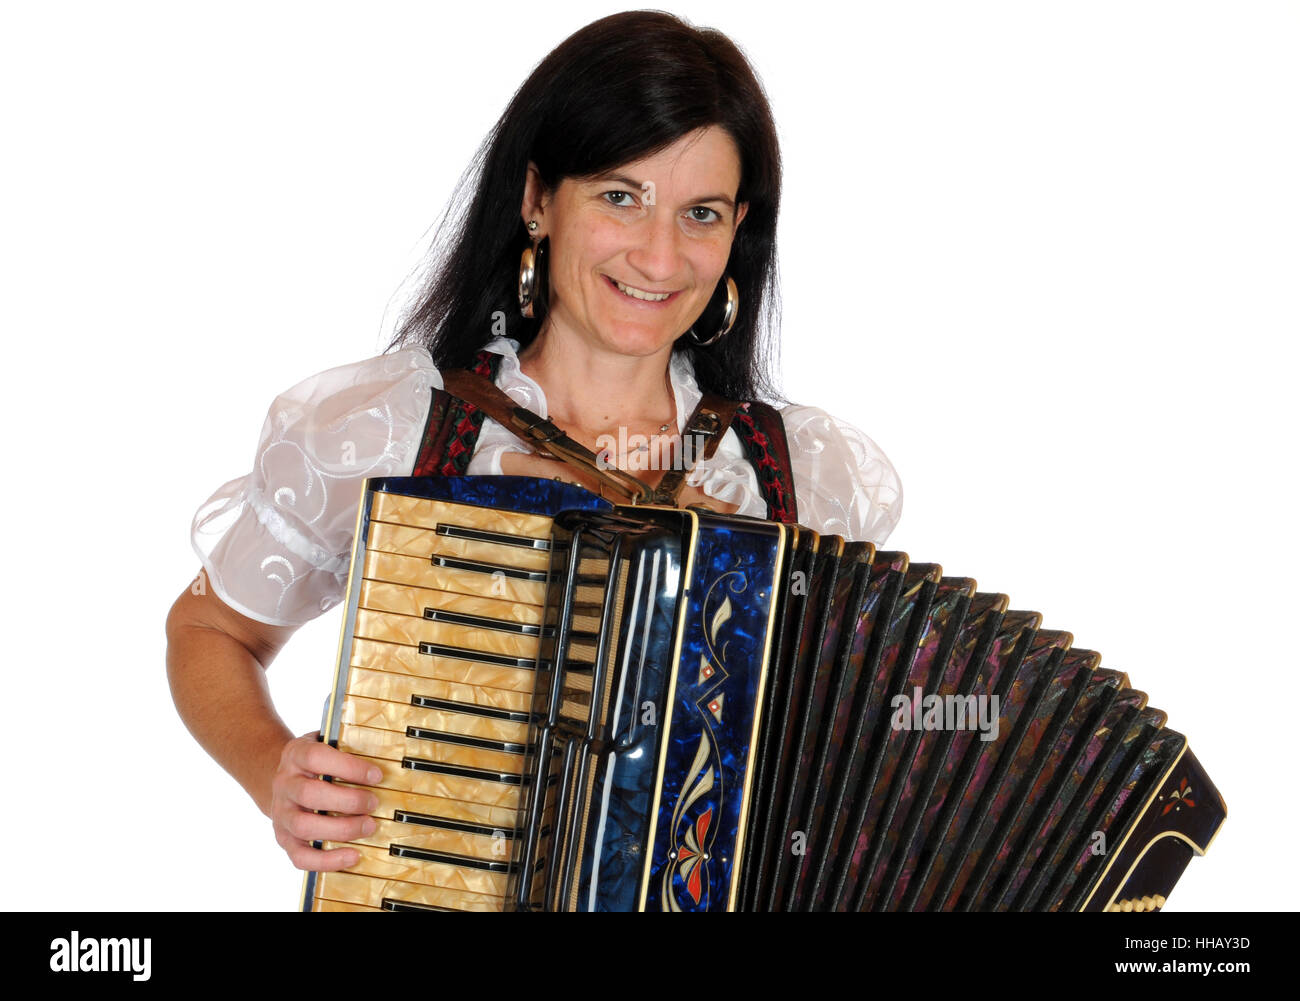 woman, make, music, game, tournament, play, playing, plays, played, accordion, Stock Photo